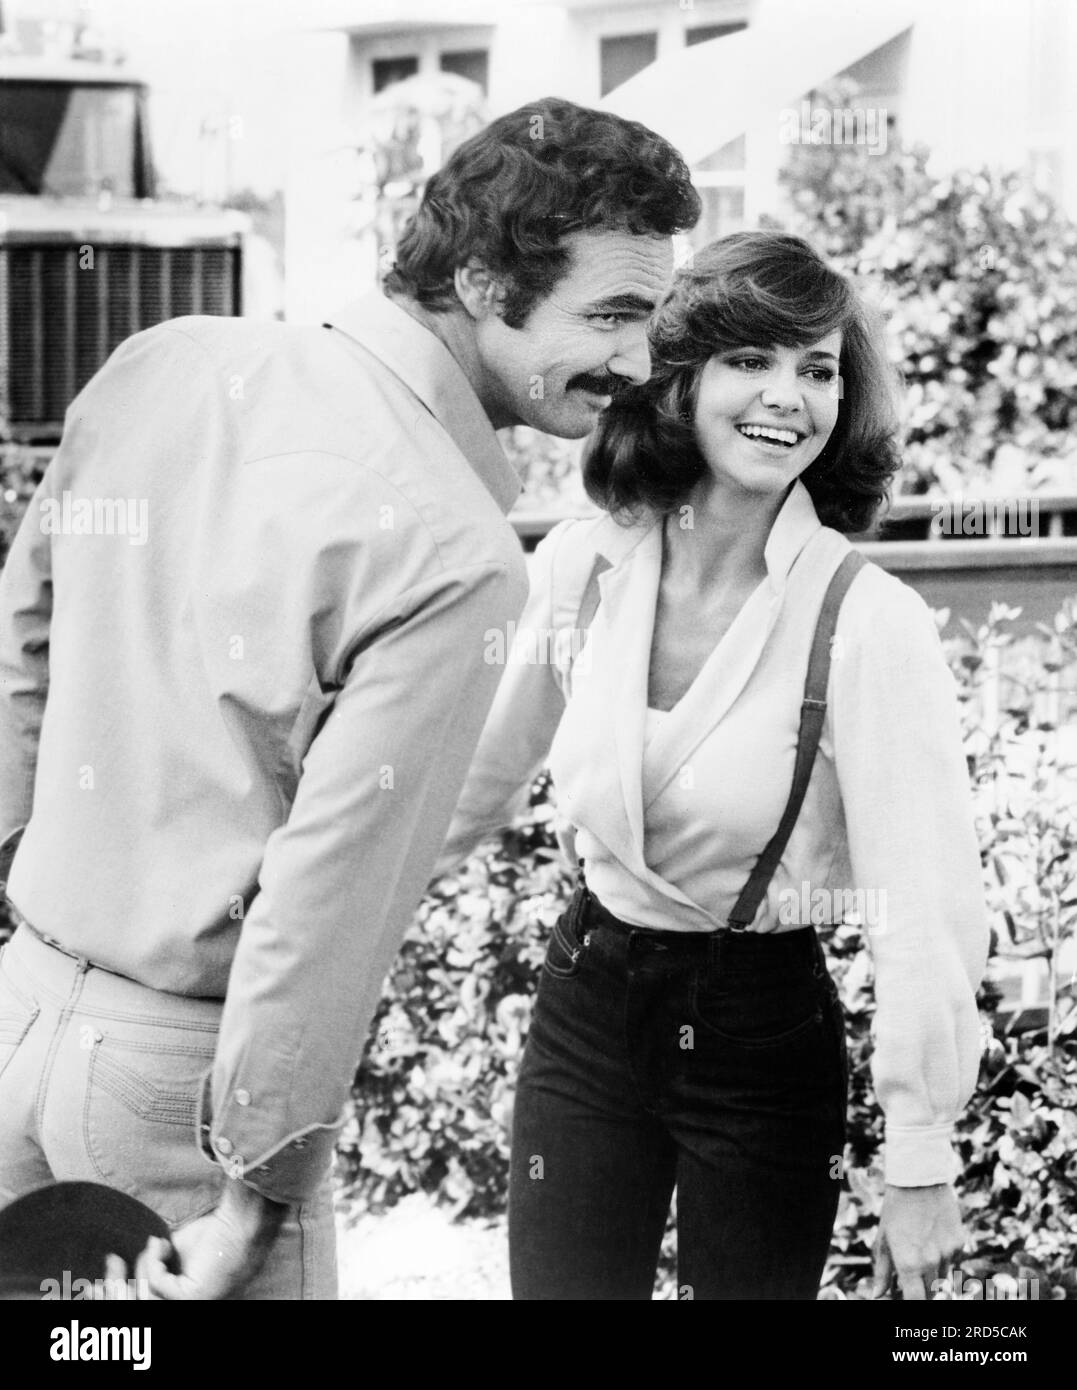 Burt Reynolds, Sally Field, on-set of the Film, 'Smokey And The Bandit II', Universal Pictures, 1980 Stock Photo